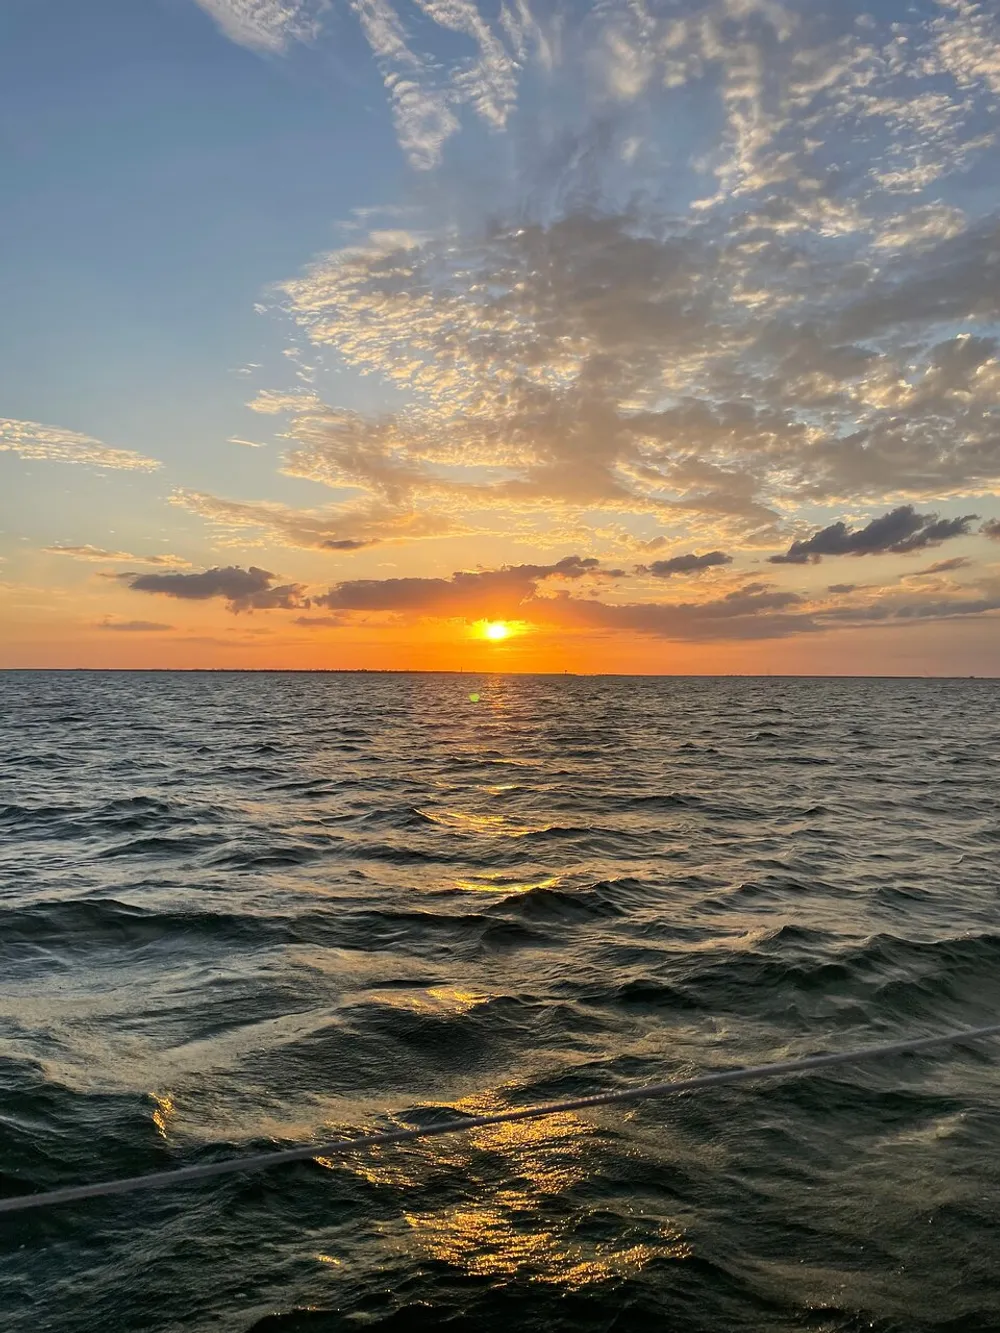 The image captures a serene sunset over choppy ocean waters with luminous clouds scattered across the sky